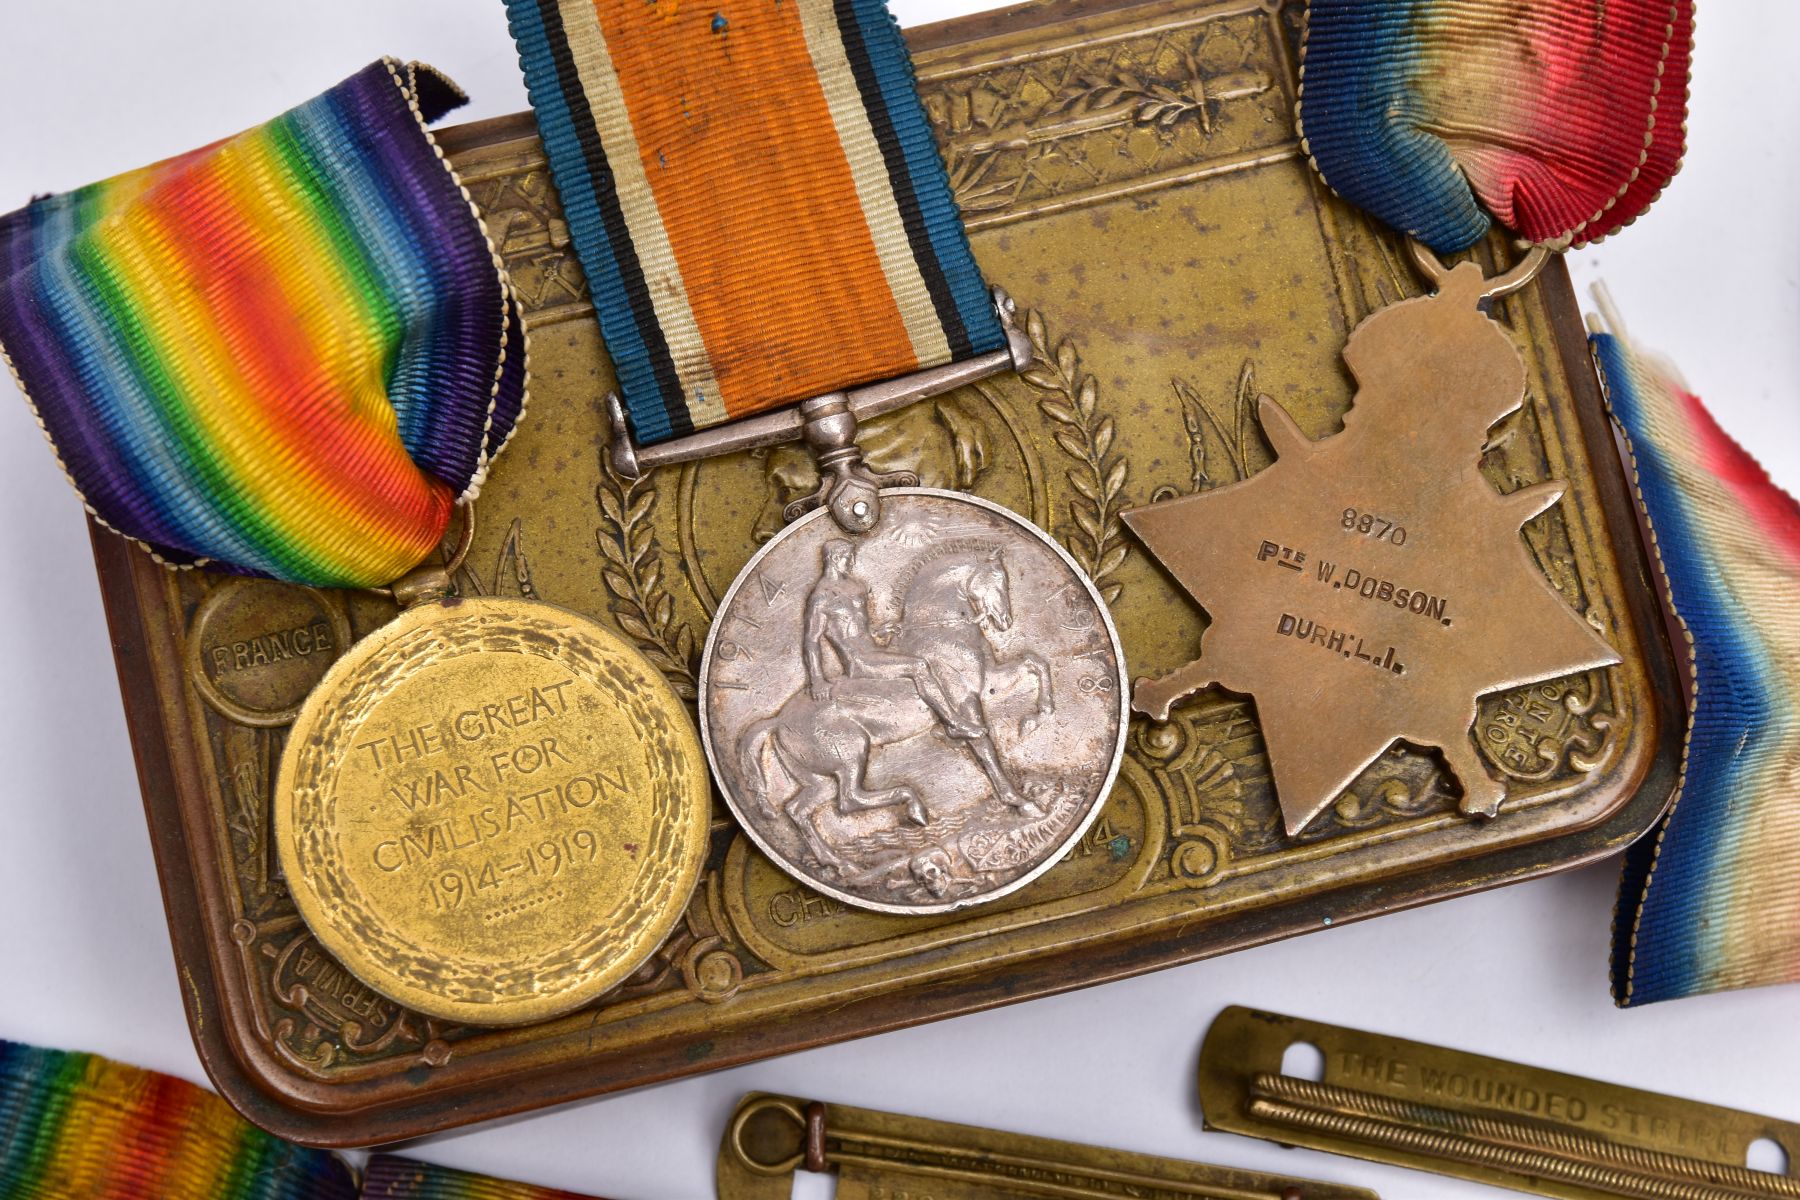 A GROUP OF WWI 1914-15 STAR BRITISH WAR AND VICTORY MEDALS, named to 8870 Pte. W.Dobson (4-8870) - Image 5 of 6